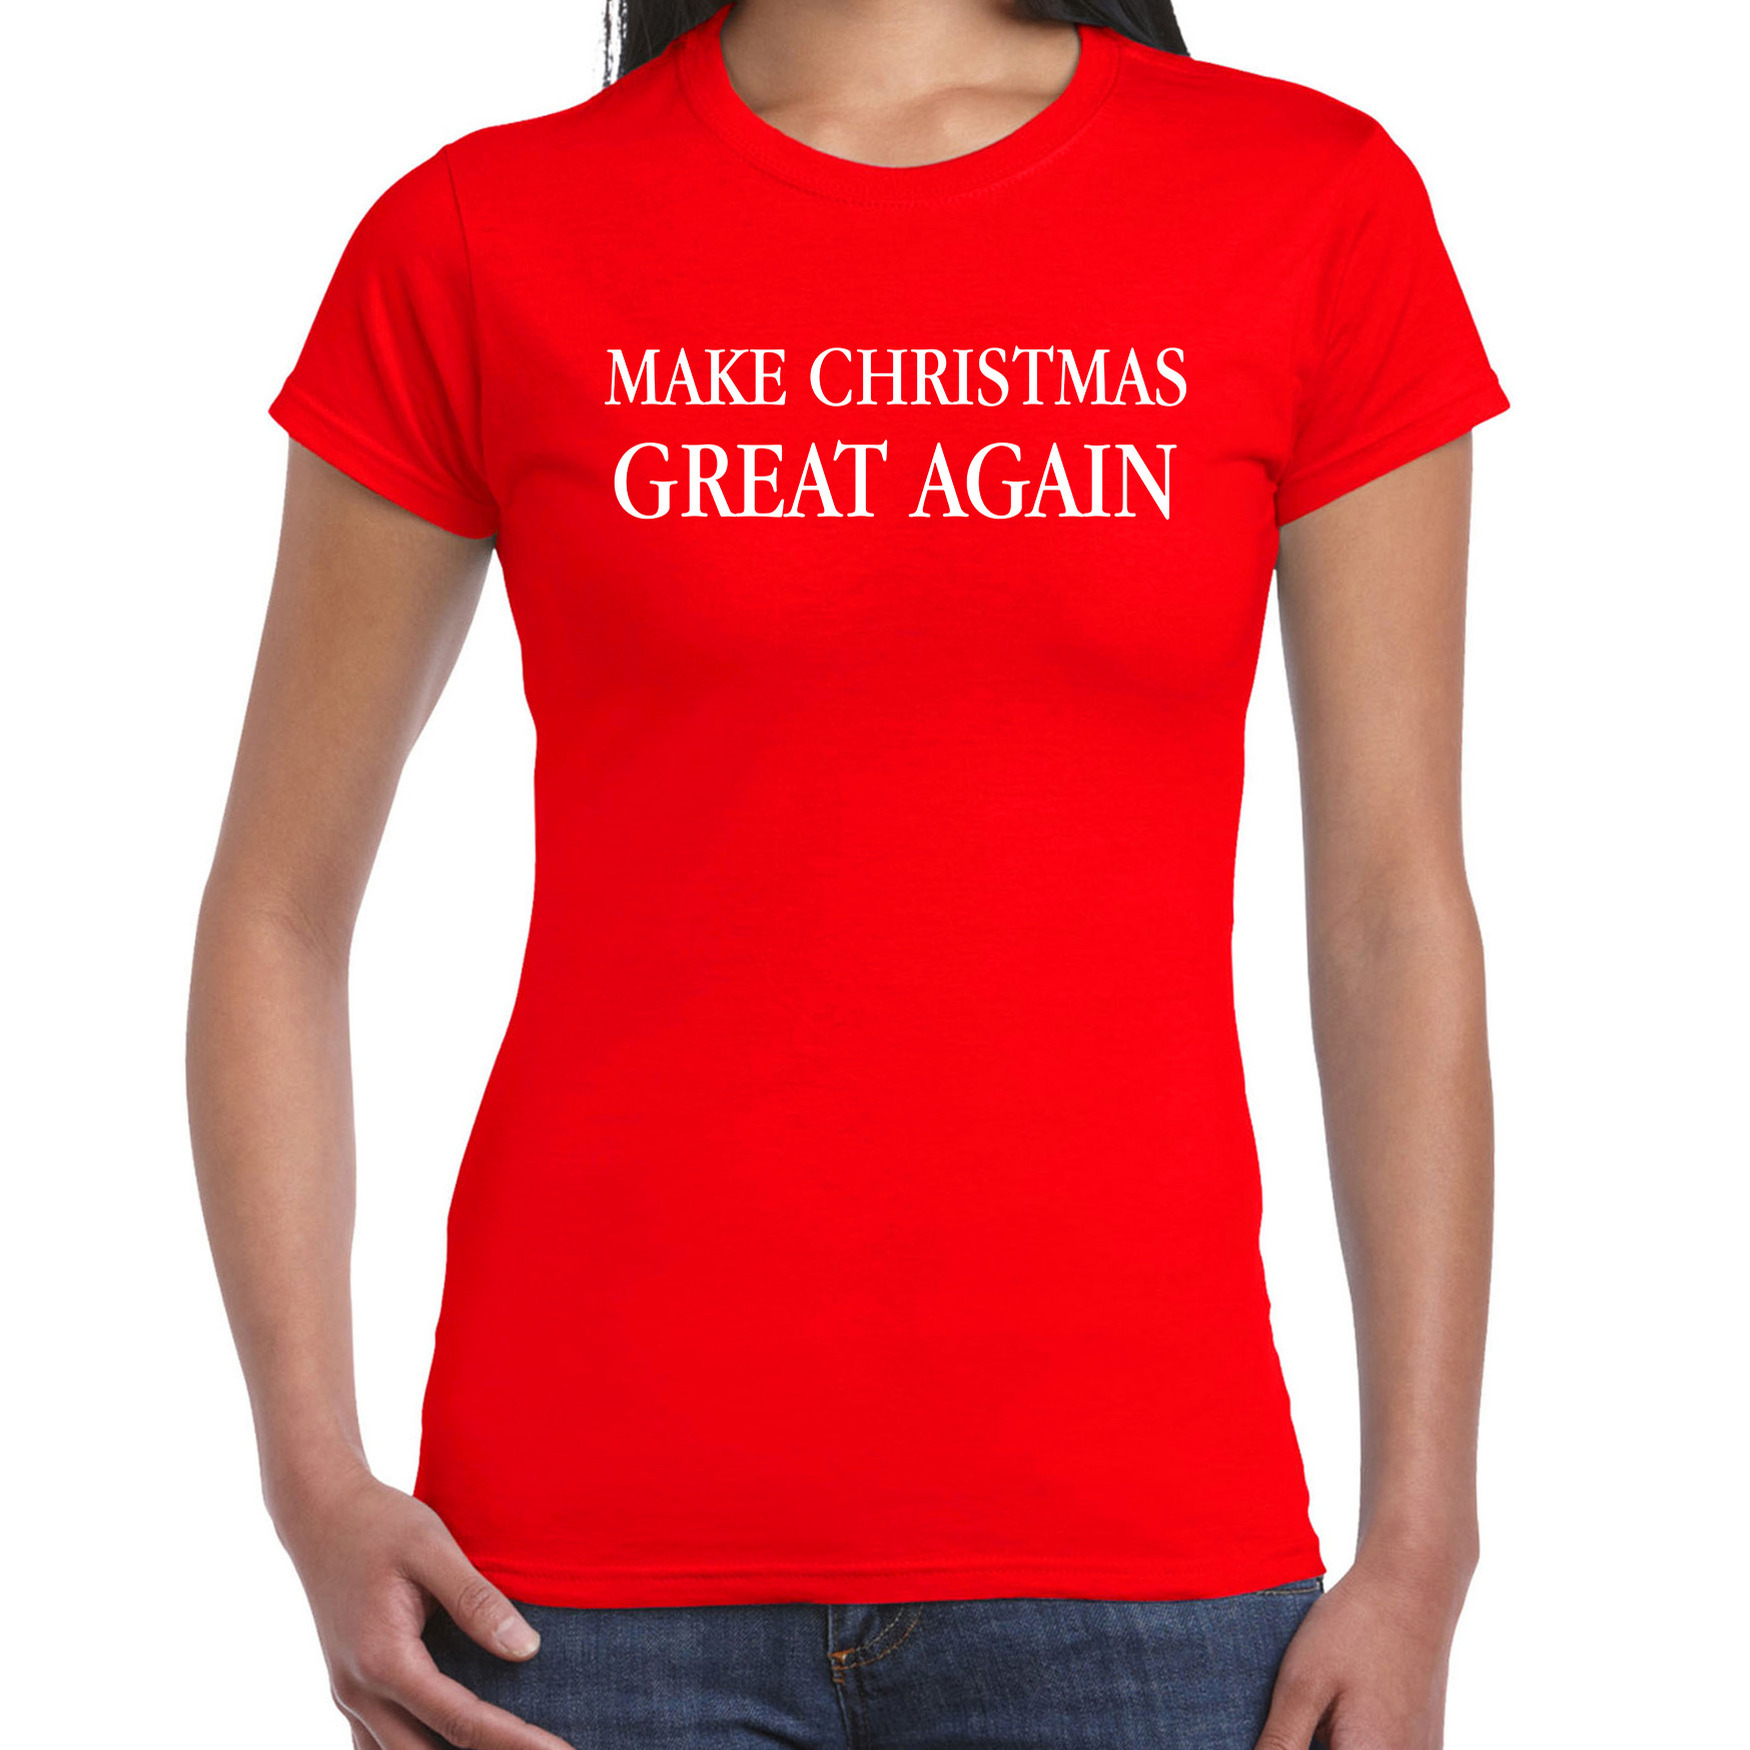 Make Christmas great again Kerst t-shirt-Kerst outfit rood voor dames